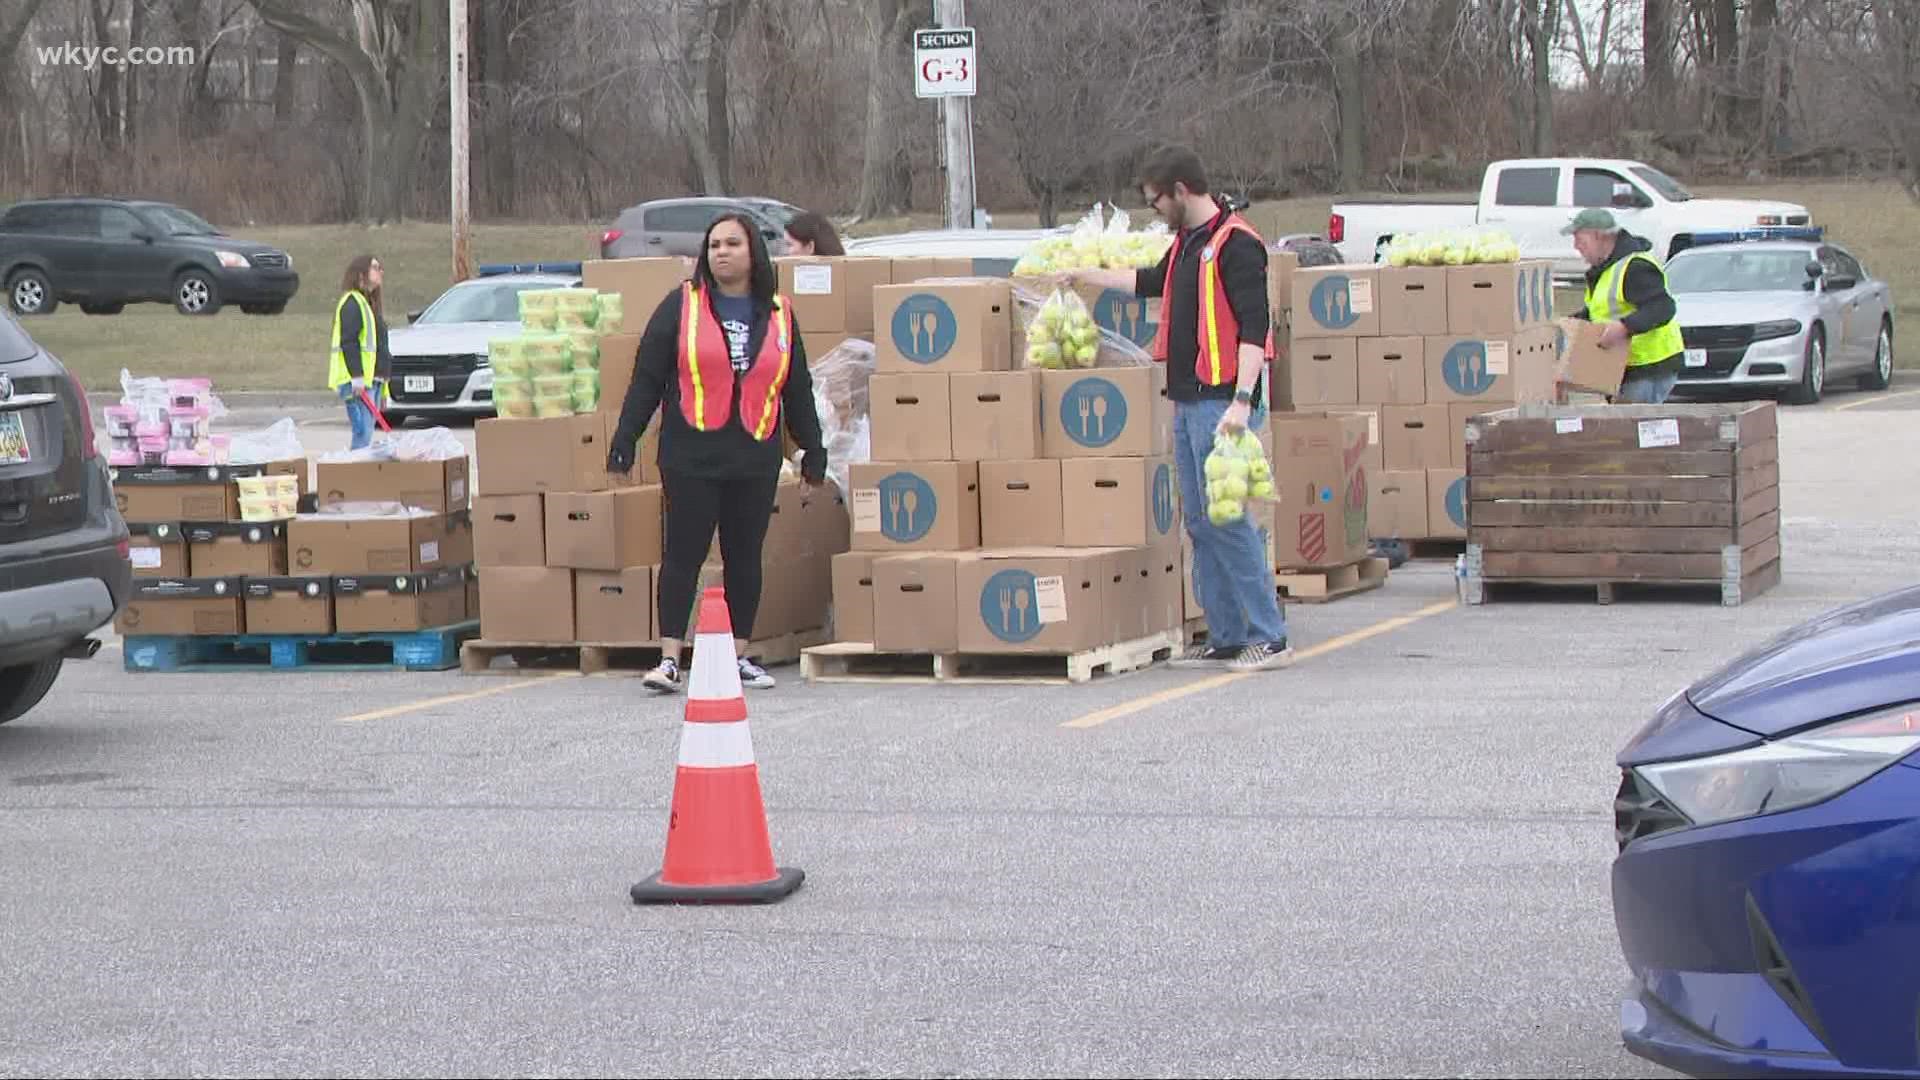 The food bank says it's serving more families now than before the pandemic. Rising food costs and gas prices have put higher demand on supply and distribution.